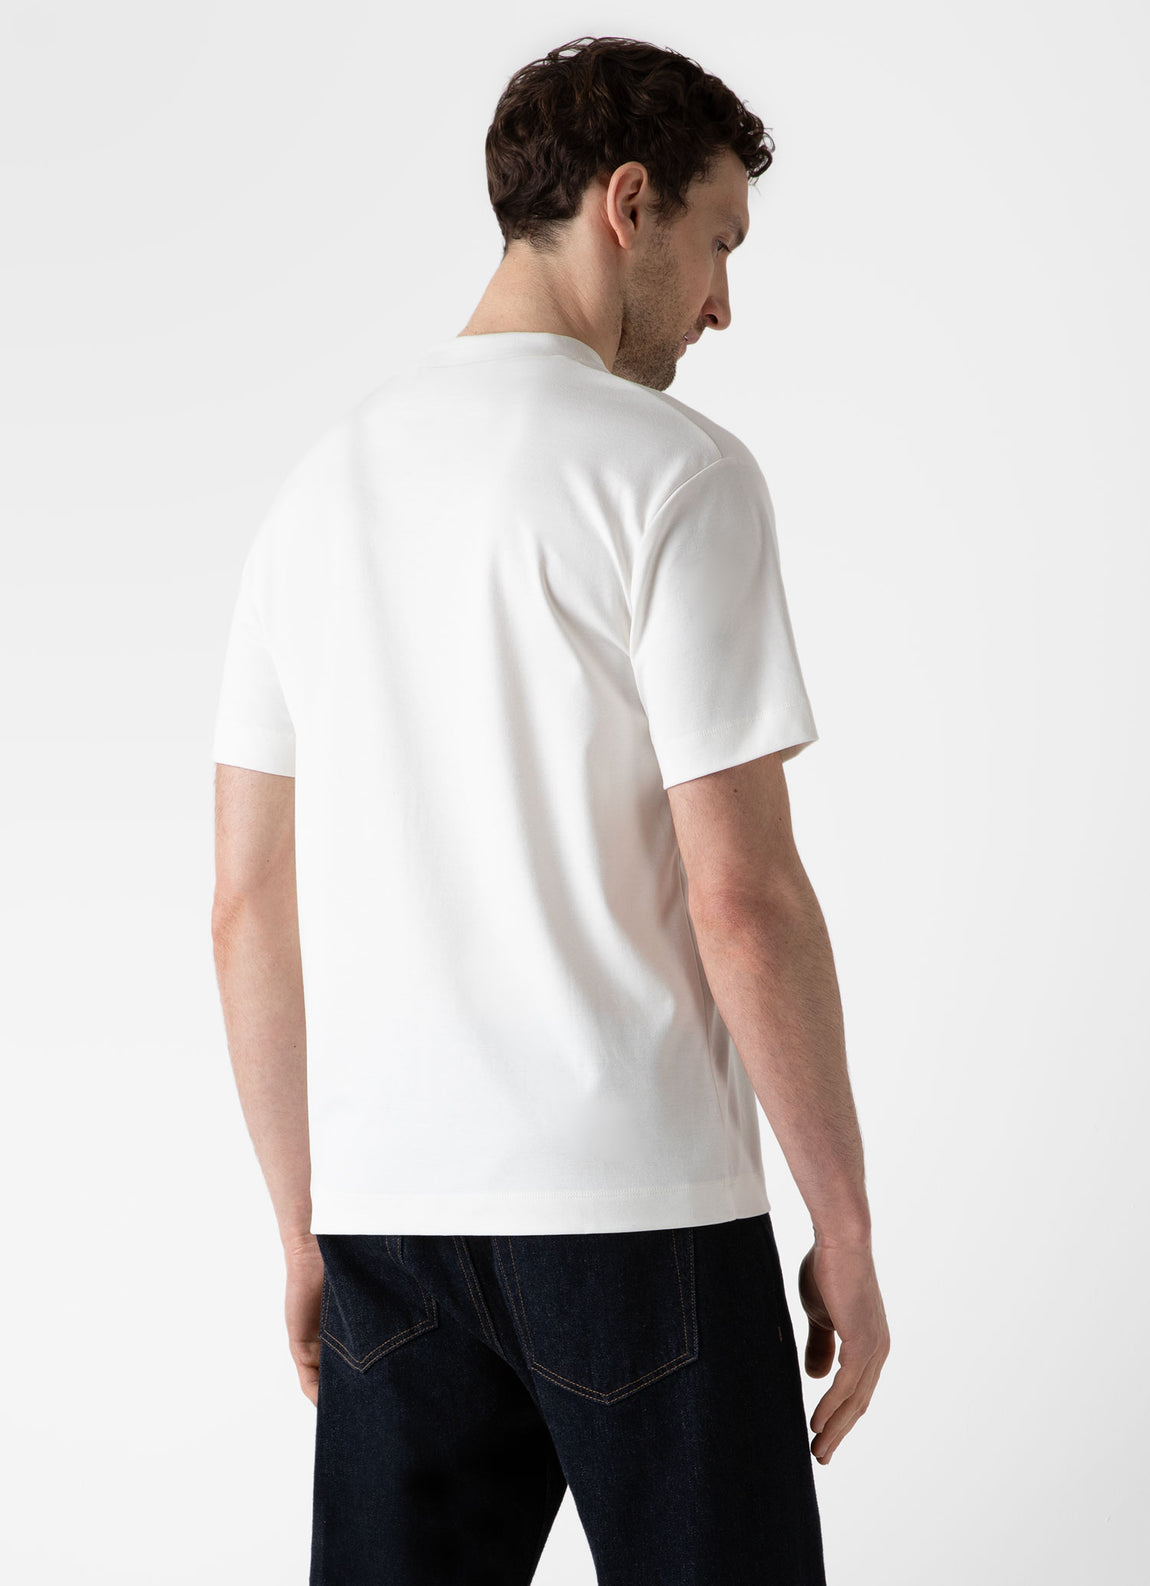 Men's Relaxed Fit Heavyweight T-shirt in Off-White